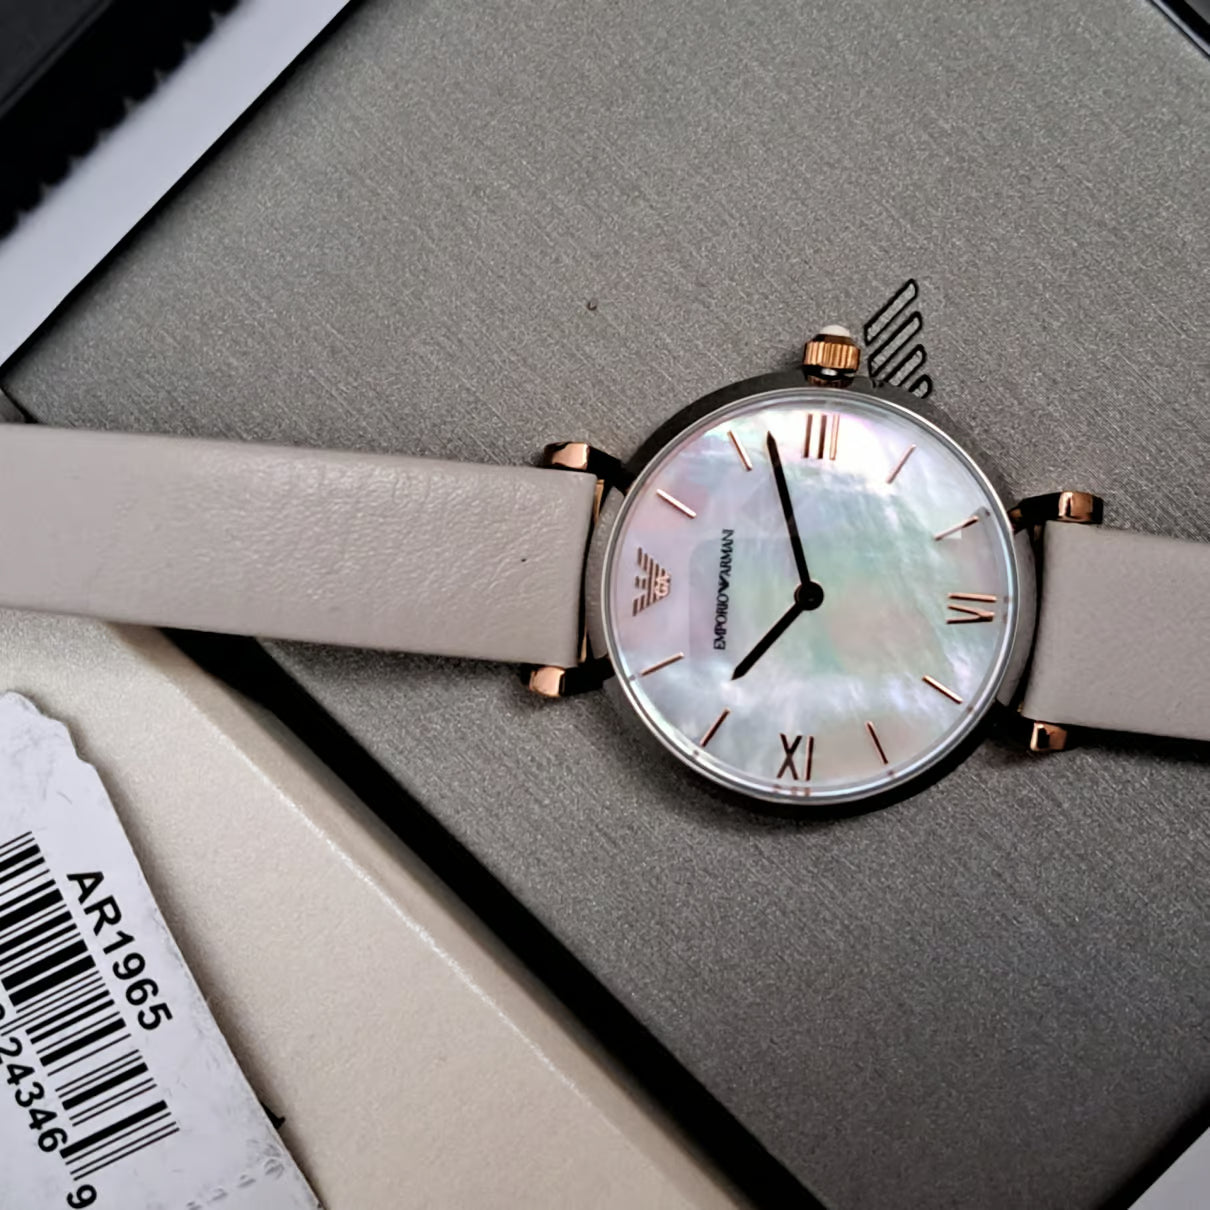 Emporio Armani Gianni T Bar Quartz Mother of Pearl Dial White Leather Strap Watch For Women - AR1965